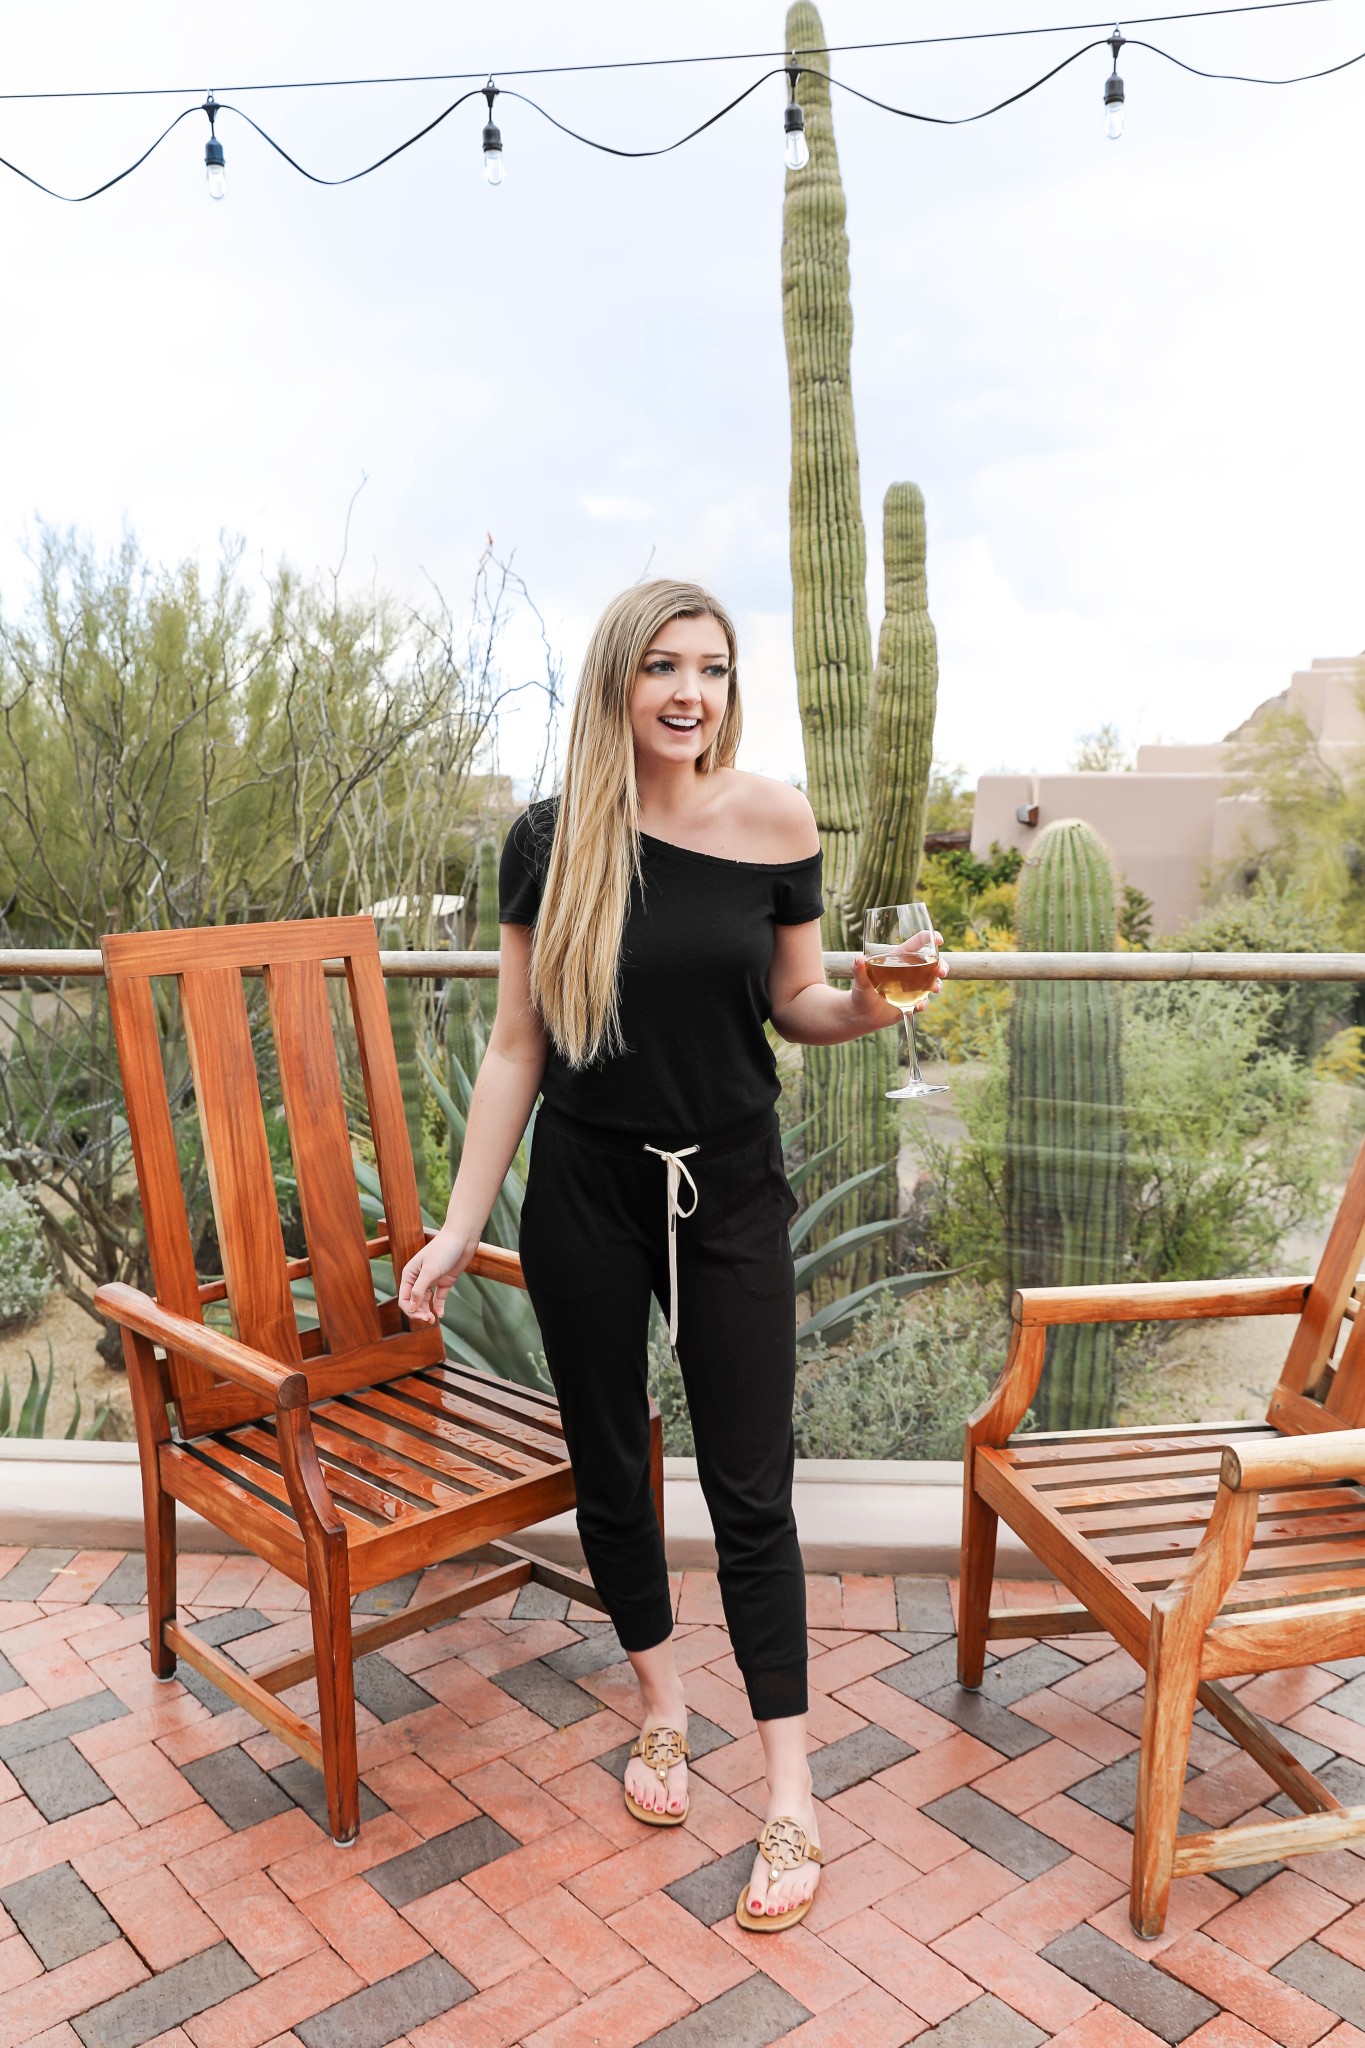 National drink wine day revolve jumpsuit casual spring outfit scottsdale arizona four seasons lauren lindmark daily dose of charm .jpg